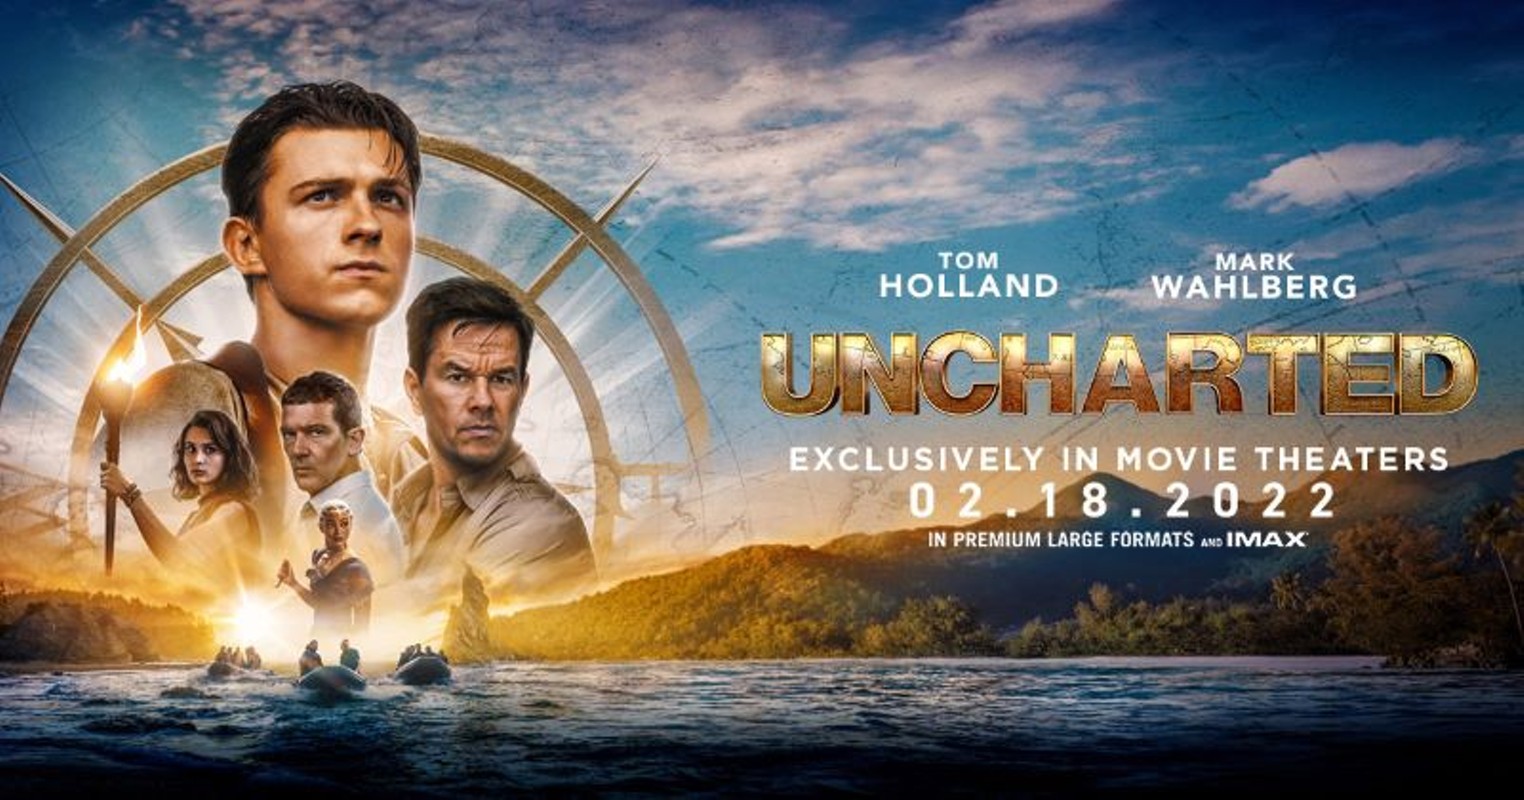 Uncharted movie review & film summary (2022)